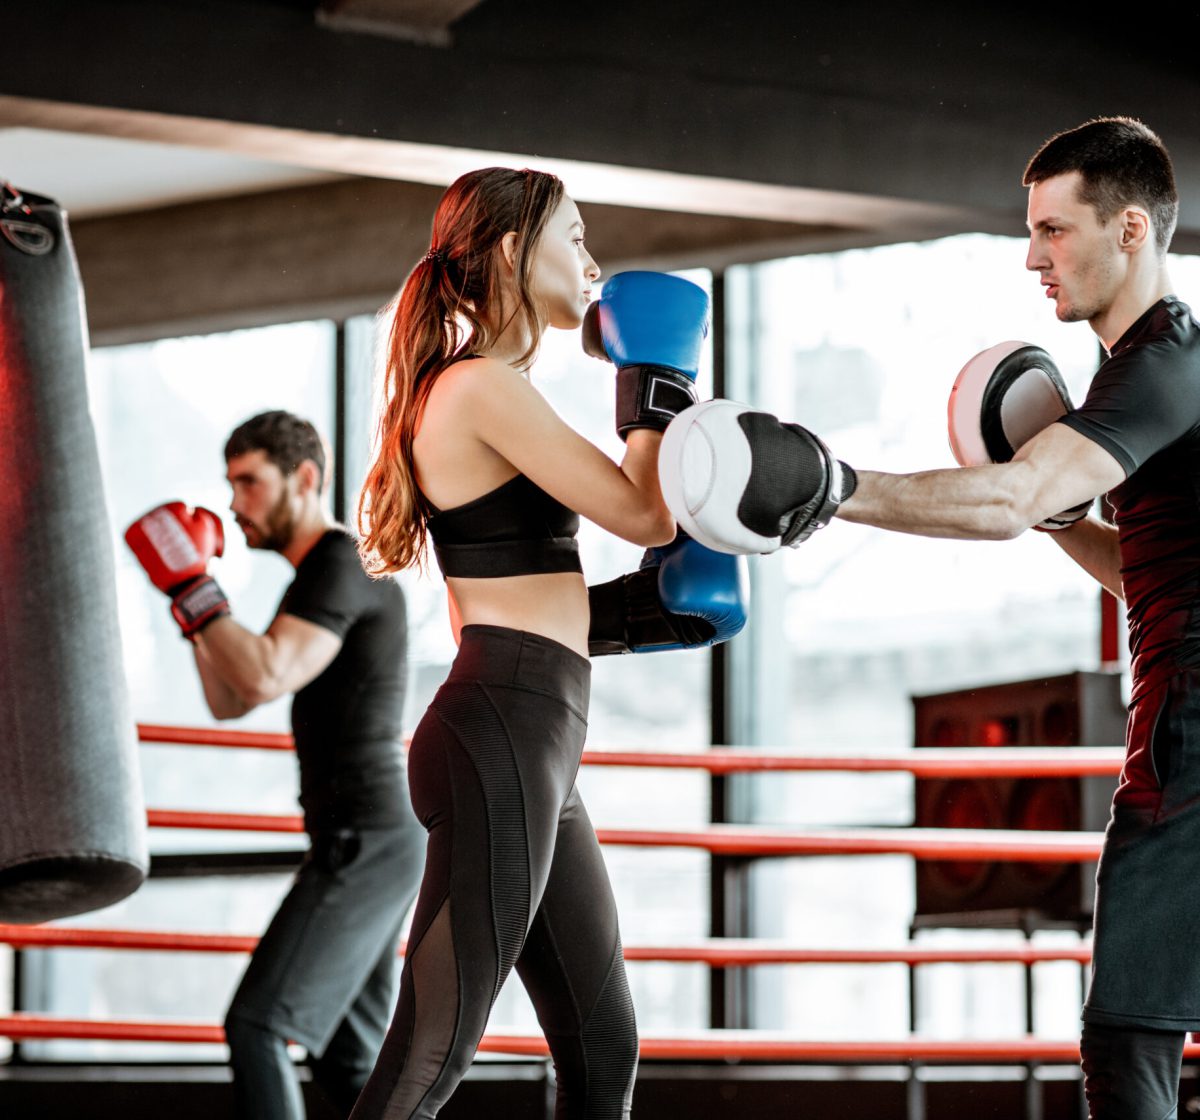 Young woman training to box with personal coach on the boxing ring at the gym